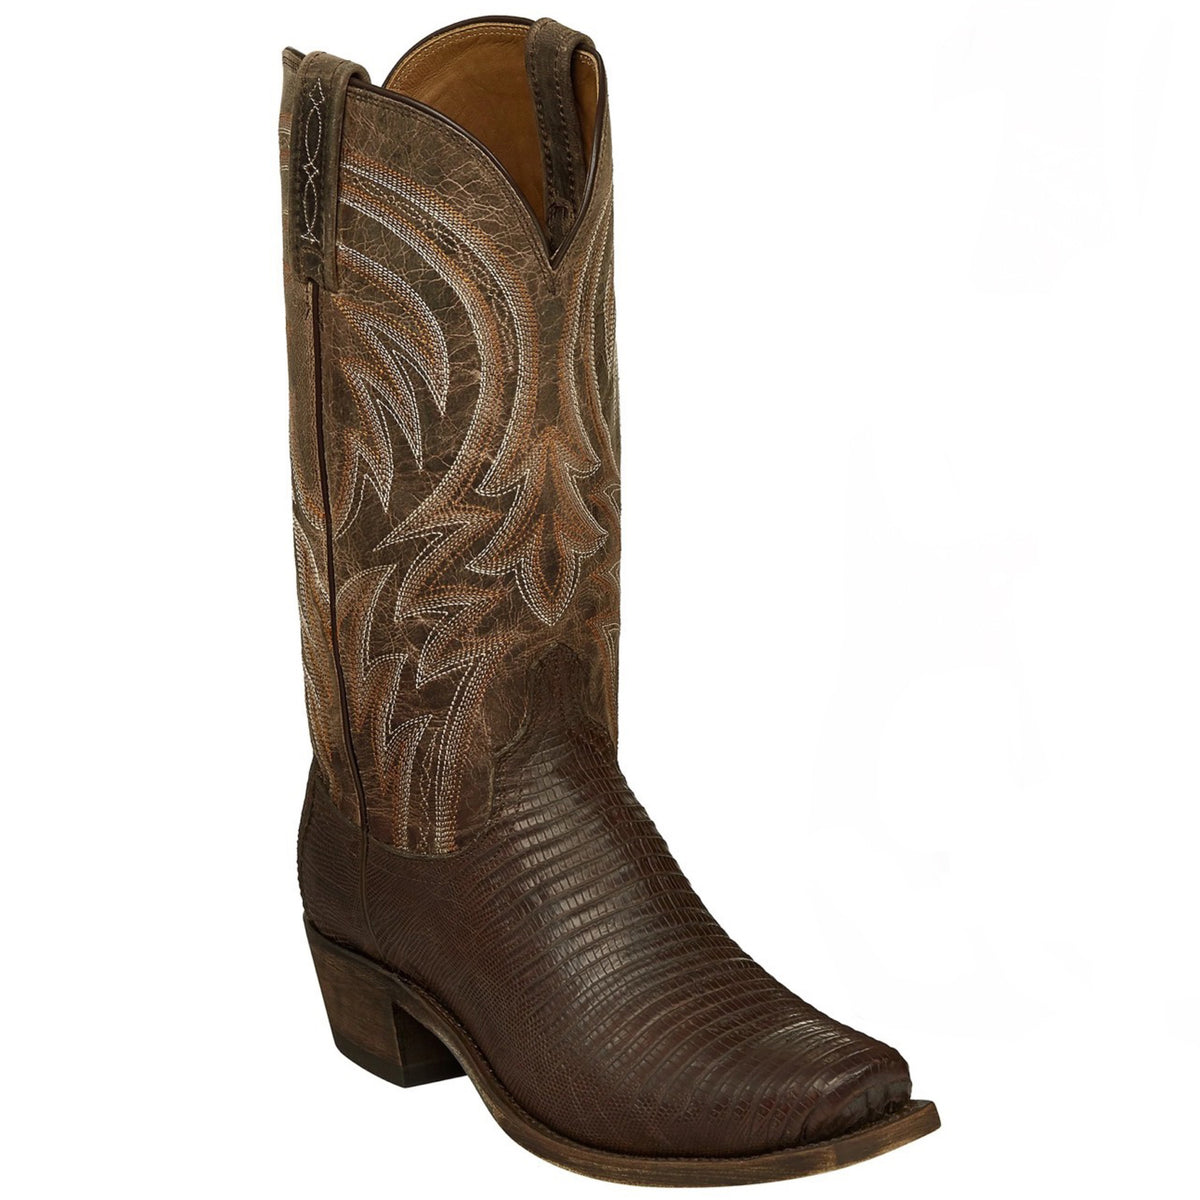 MEN’S LUCCHESE PERCY - ANTIQUE TAN LIZARD BOOTS